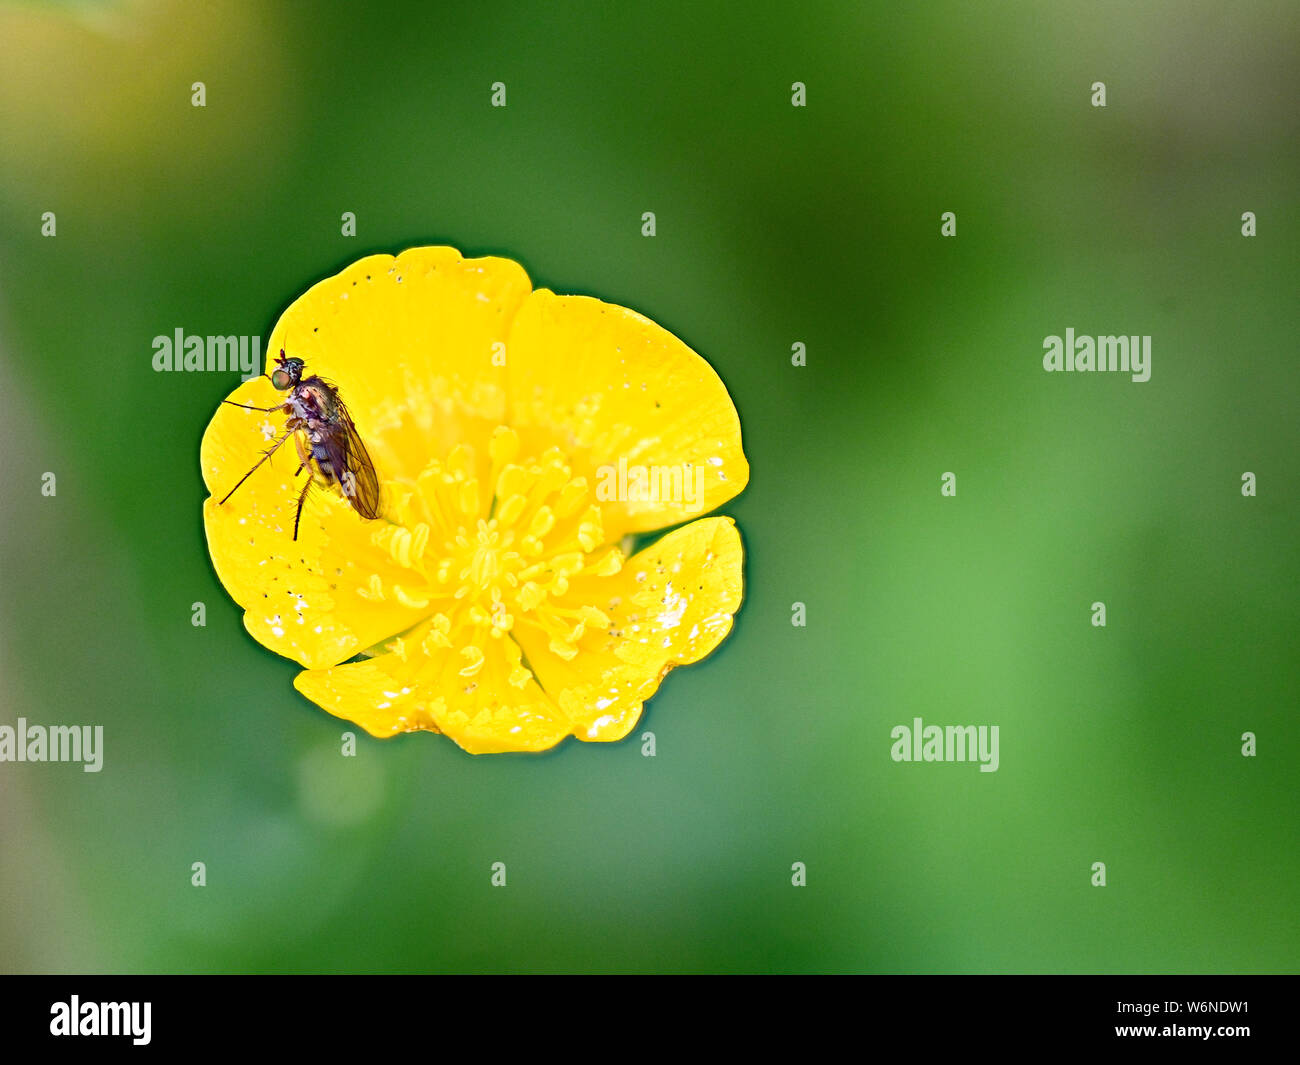 Gnat or wasp on yellow buttercup flower against muted green background Focus stacked for greater detail Stock Photo